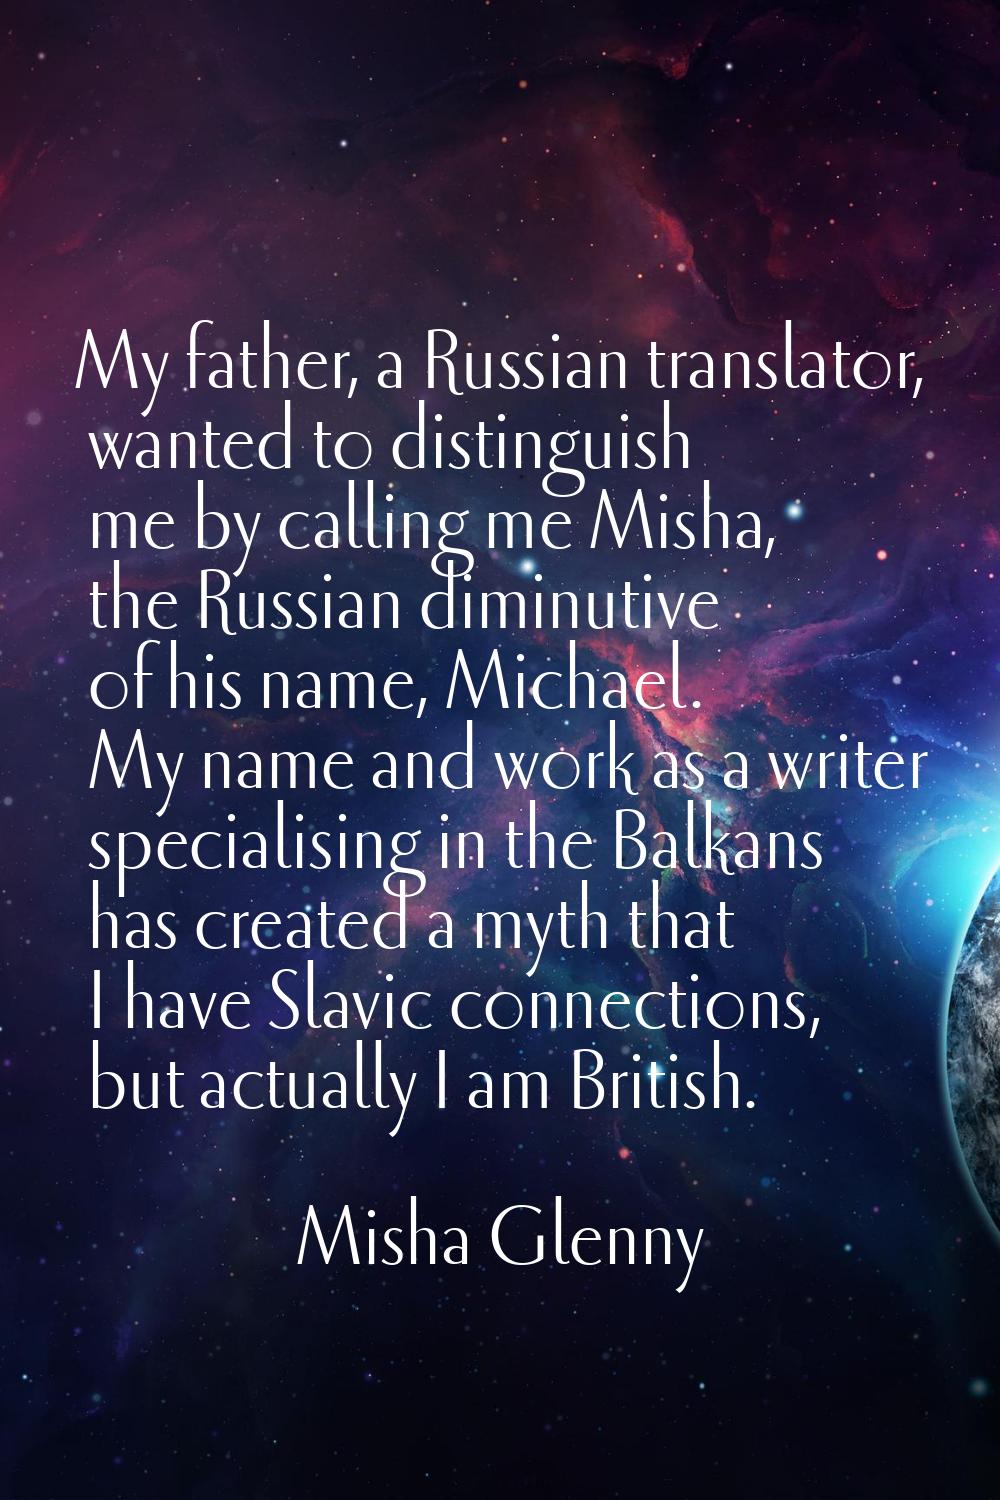 My father, a Russian translator, wanted to distinguish me by calling me Misha, the Russian diminuti